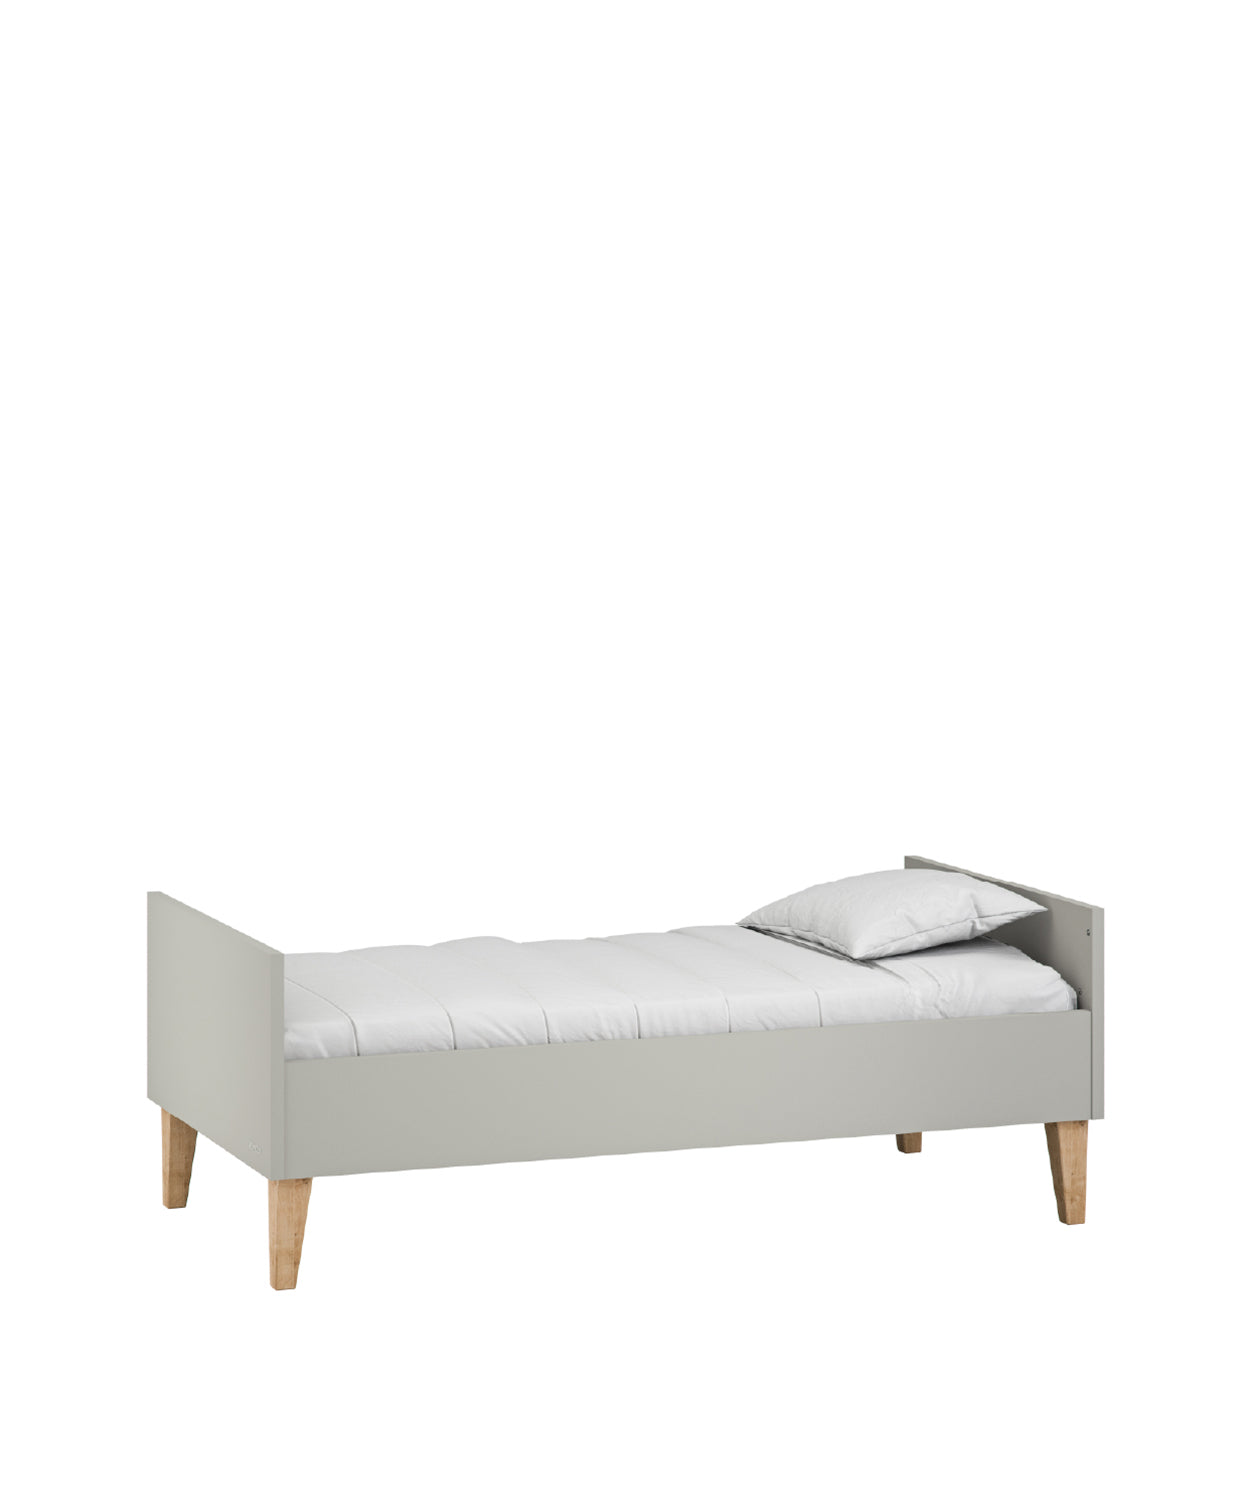 Venicci Saluzzo Cot Bed - Warm Grey - Collection Only!